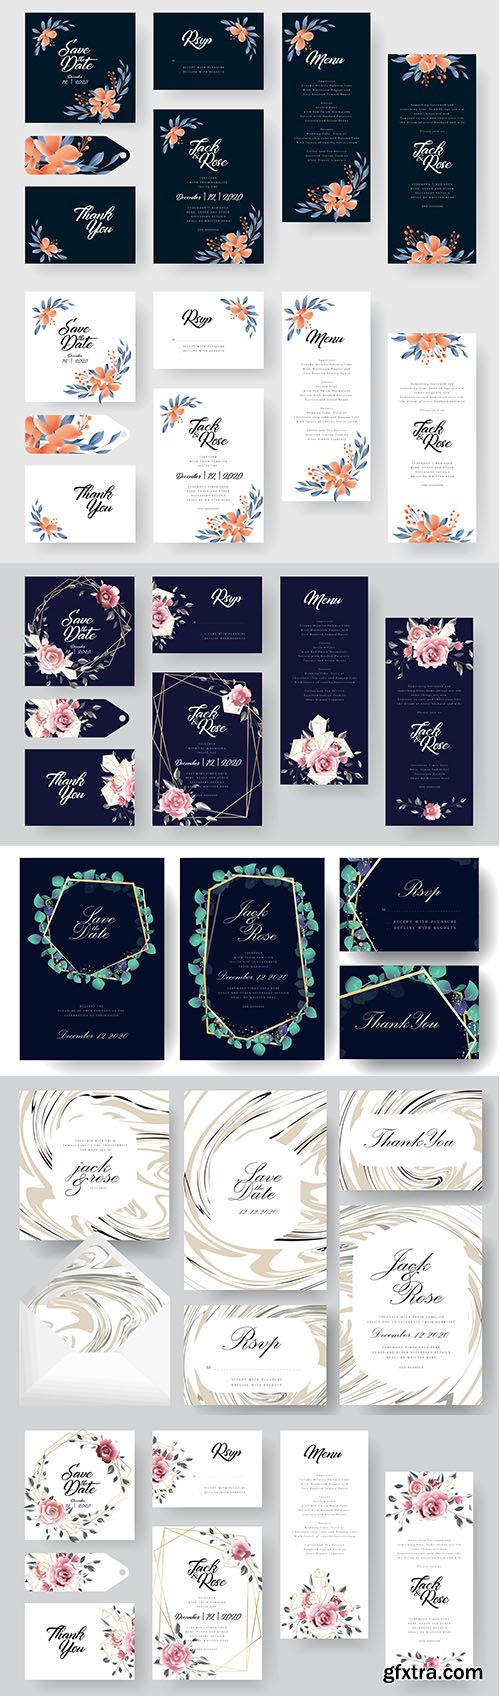 Modern Floral Wedding Invitation Card Collection